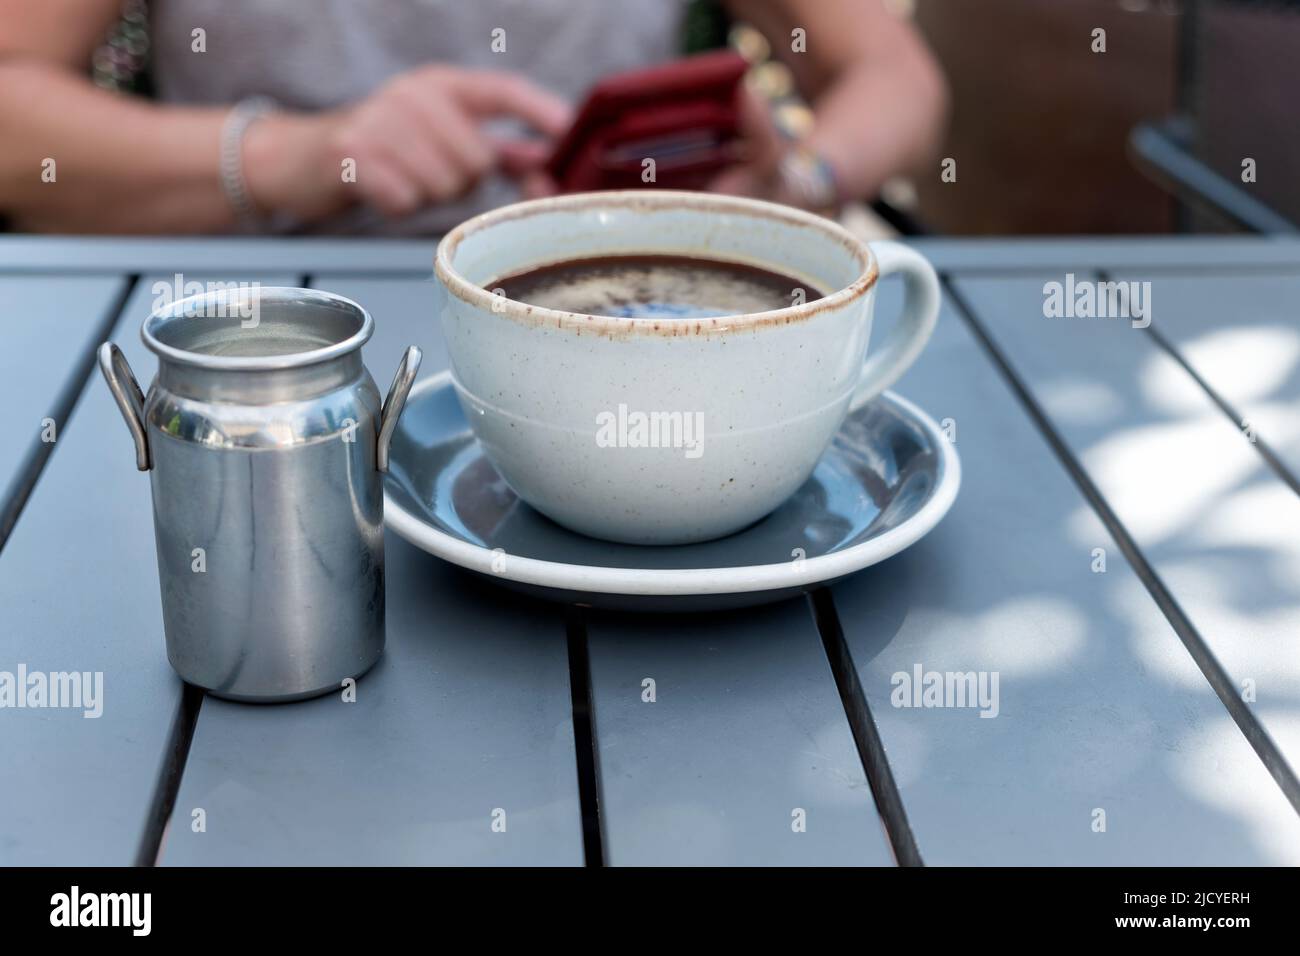 A woman is busy texting on her mobile whilst waiting for a freshly made cup of coffee to cool. She is sat at an outside cafe table on a summer evening Stock Photo